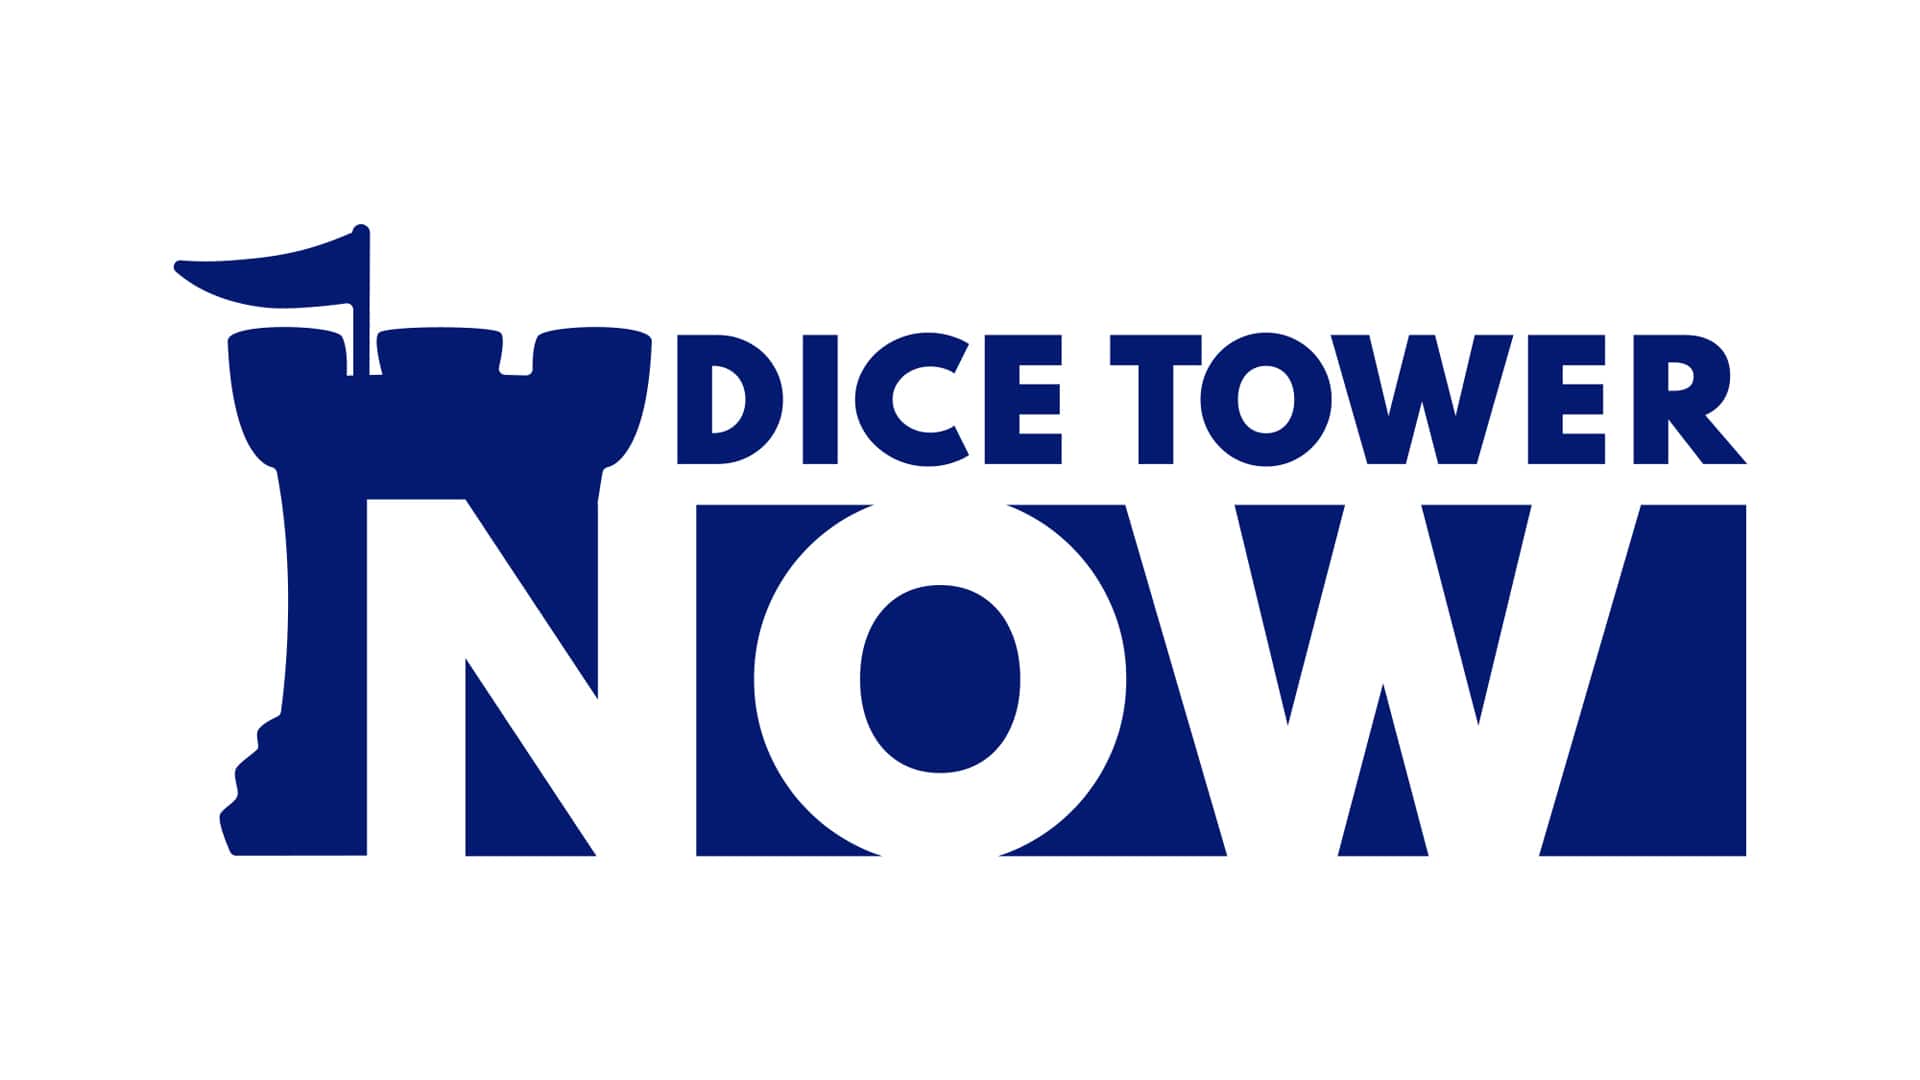 Image showcasing 'The Dice Tower,' a popular platform for board game reviews, news, and community engagement.